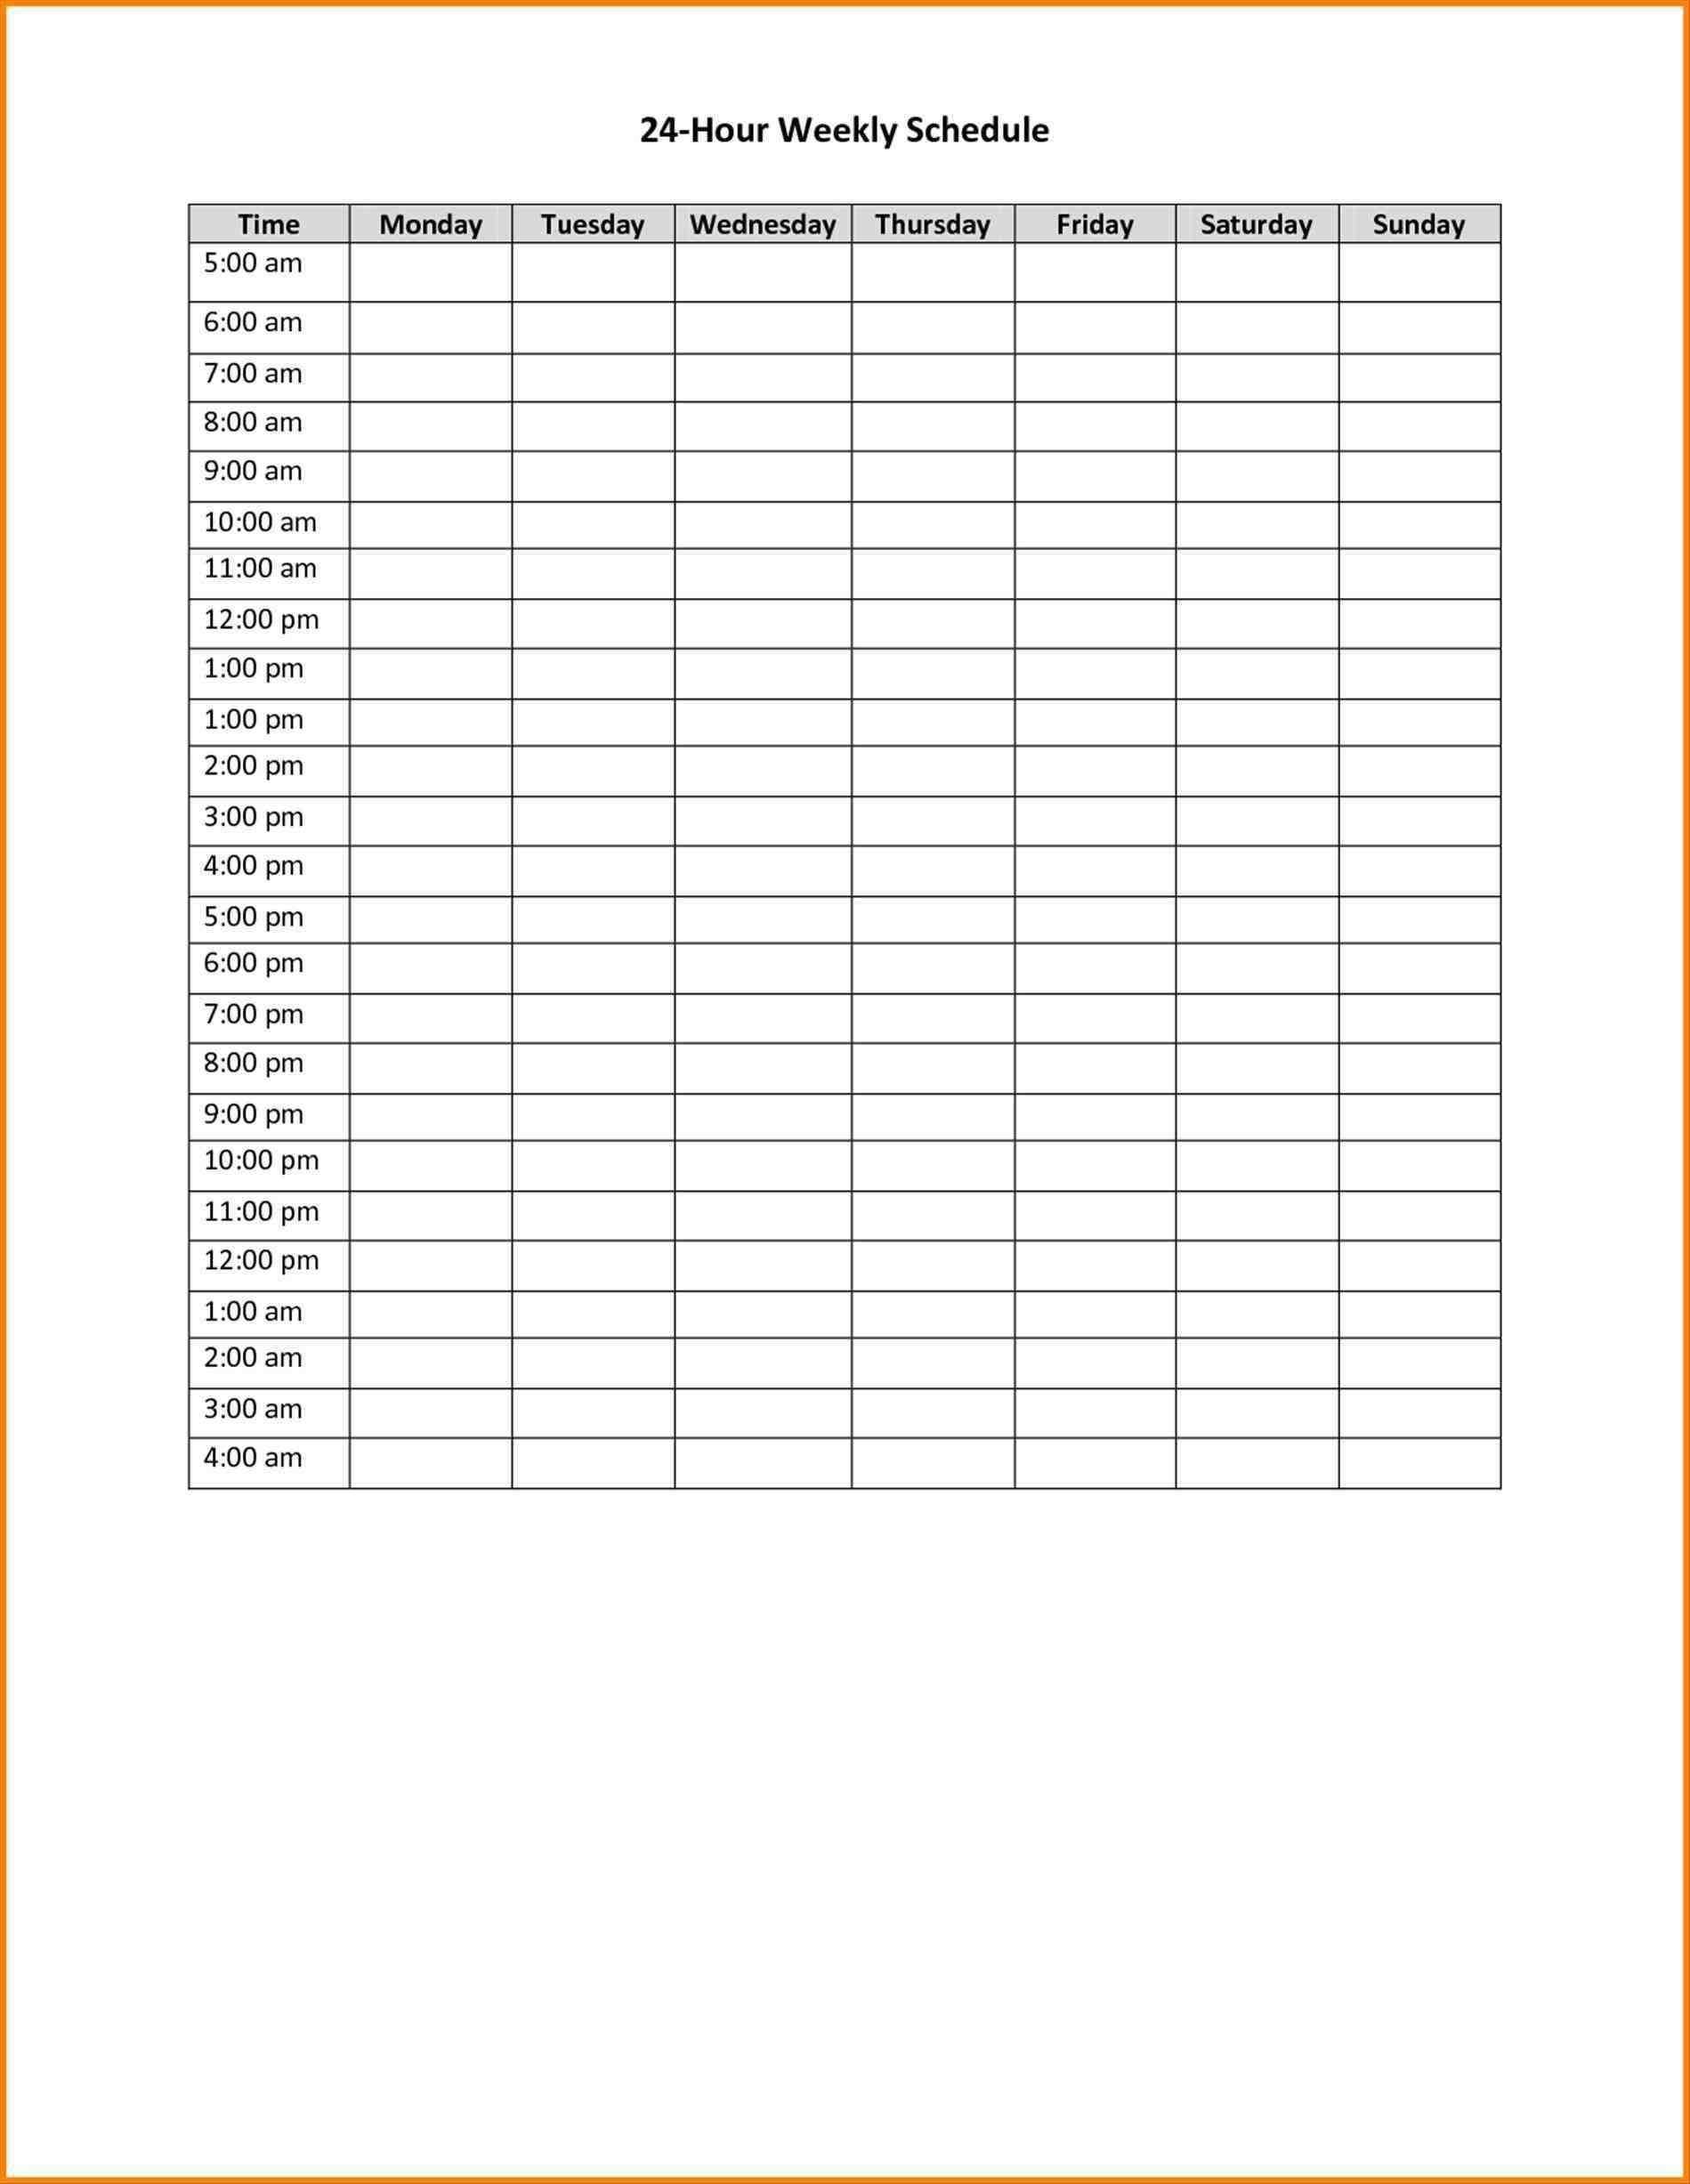 012 Hr Schedule Template At Weekly Calendar With Hours Blank Schedule Template 7 Day 24 Hours